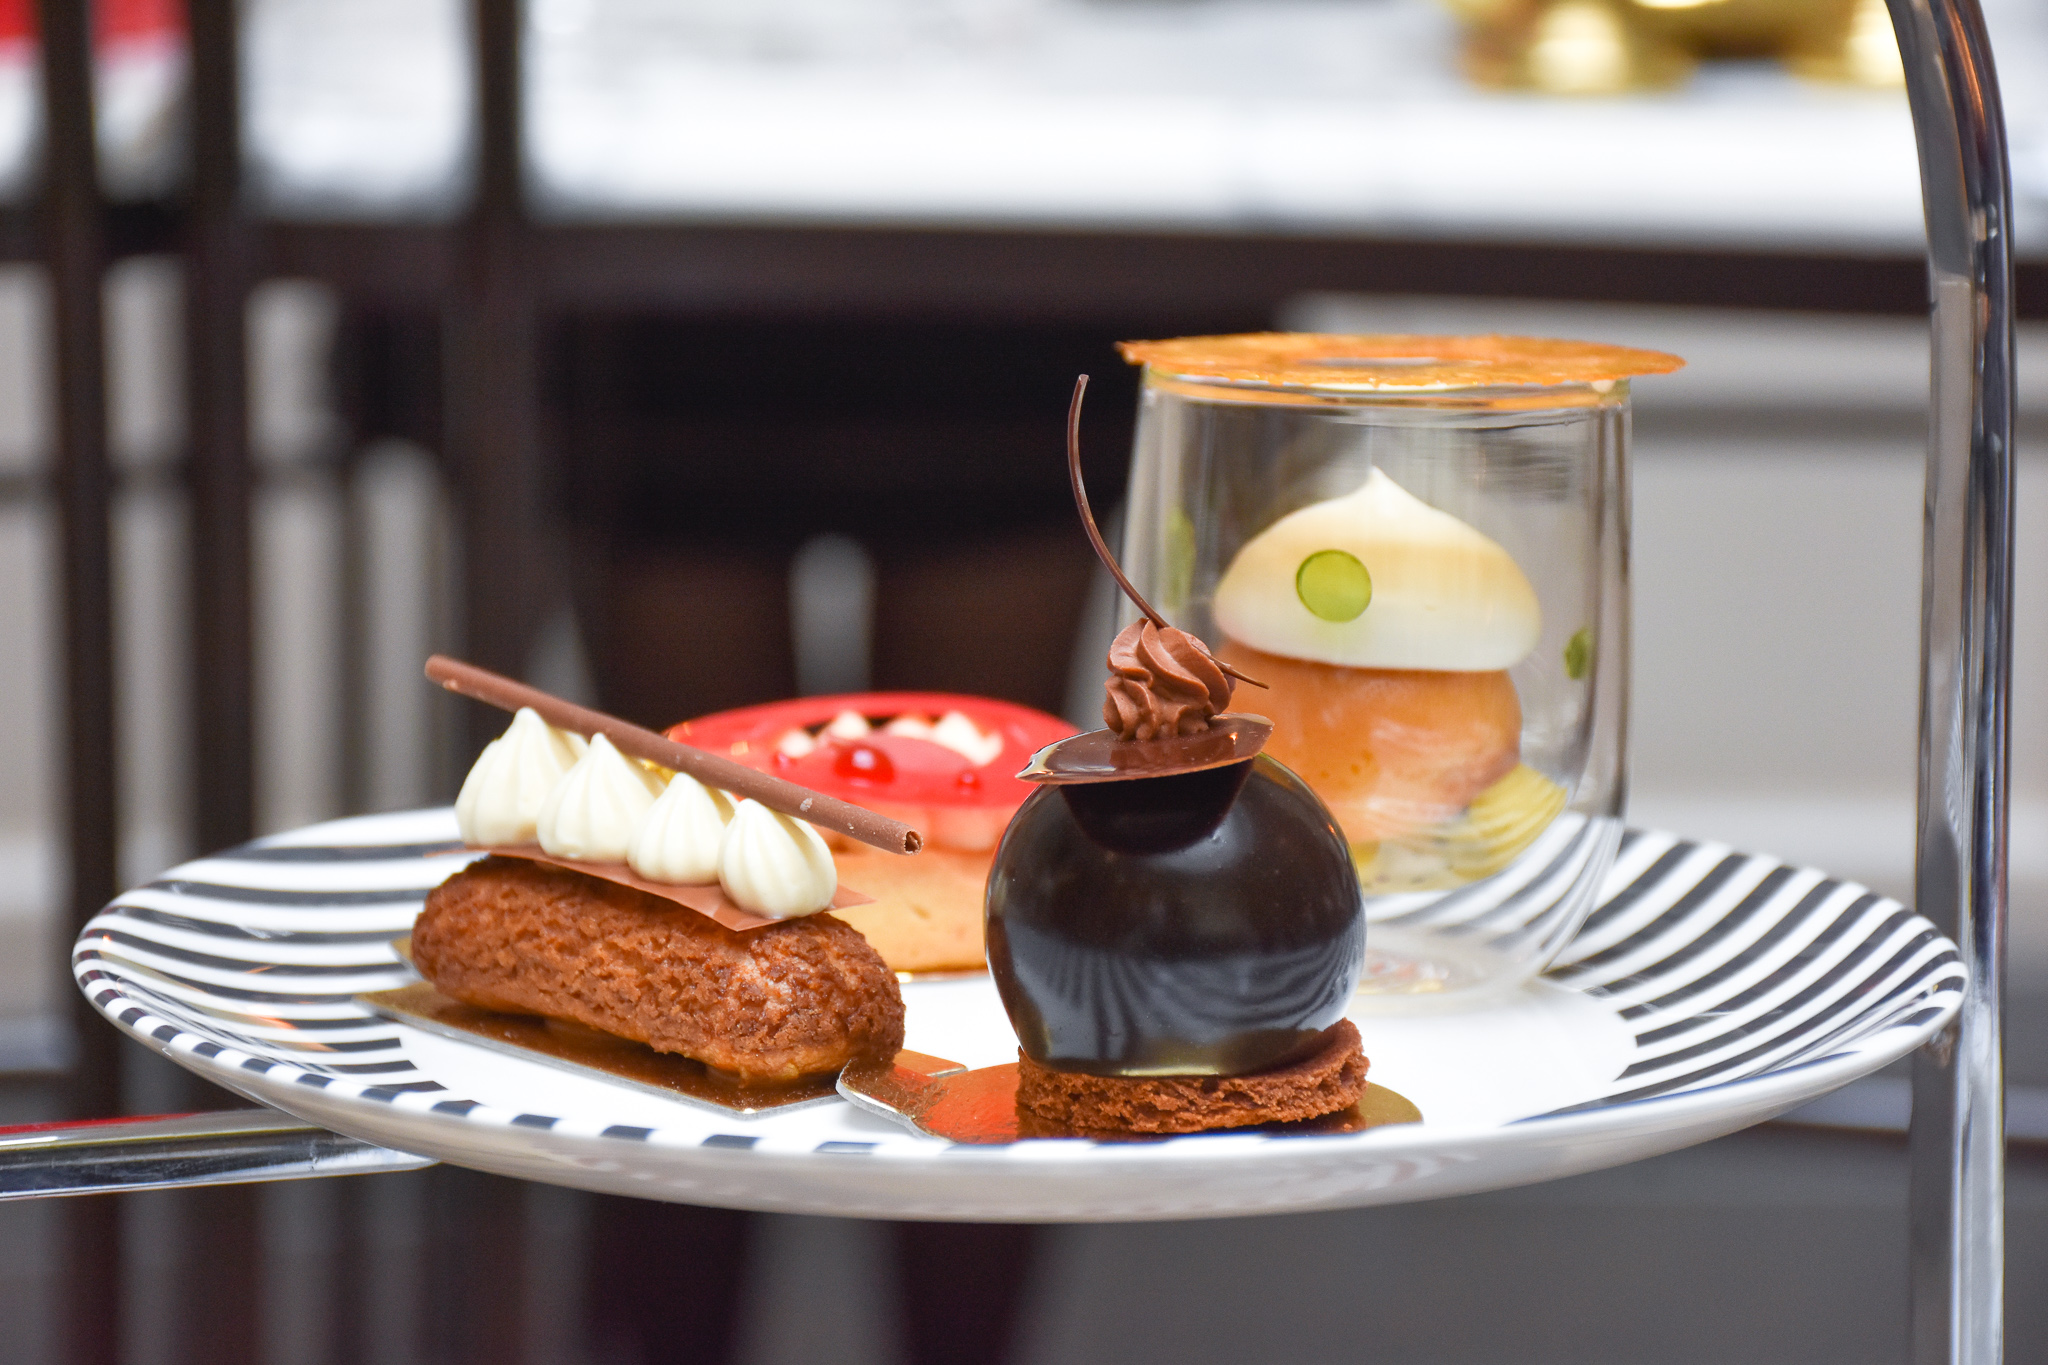 Corinthia Hotel London Afternoon Tea Review: Five Star Service in The Crystal Moon Lounge